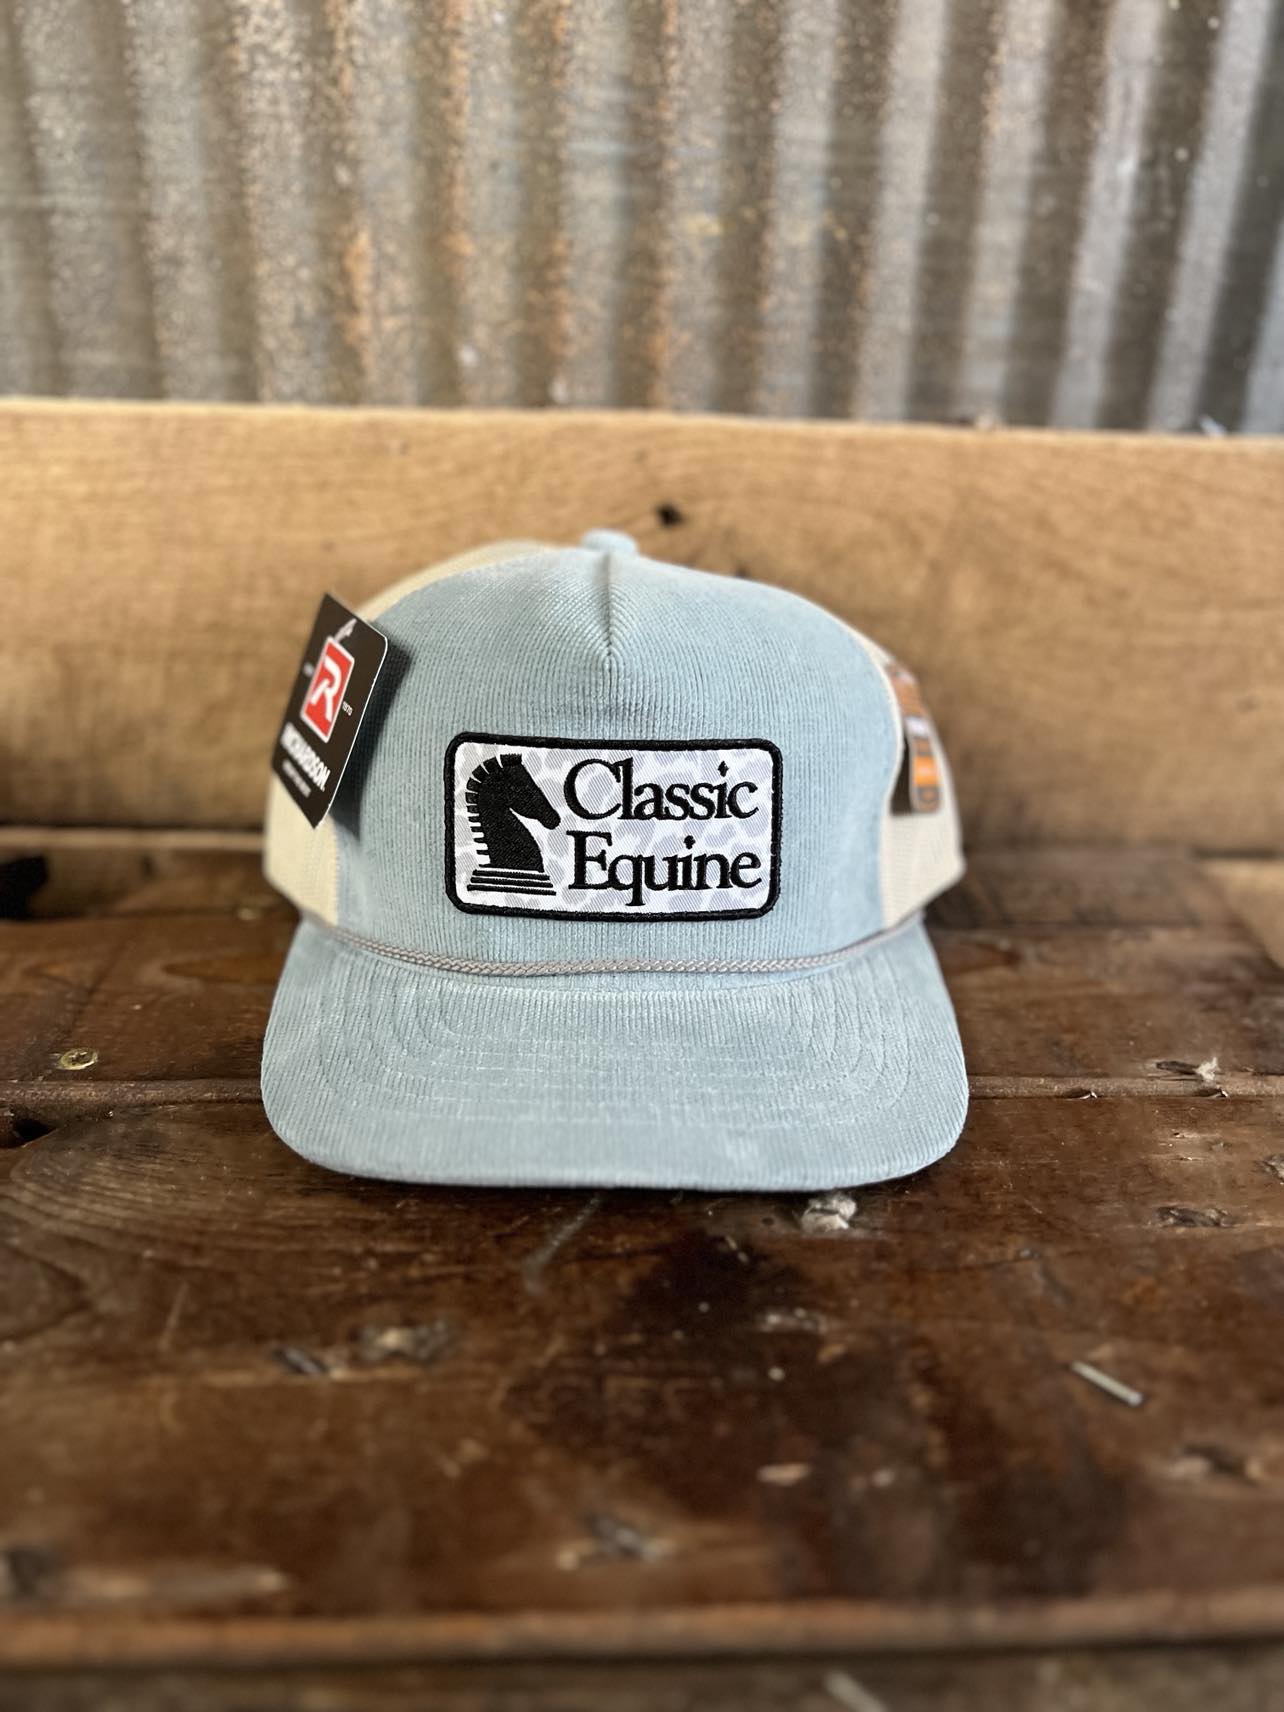 Equibrand Caps-Caps-Equibrand-Lucky J Boots & More, Women's, Men's, & Kids Western Store Located in Carthage, MO